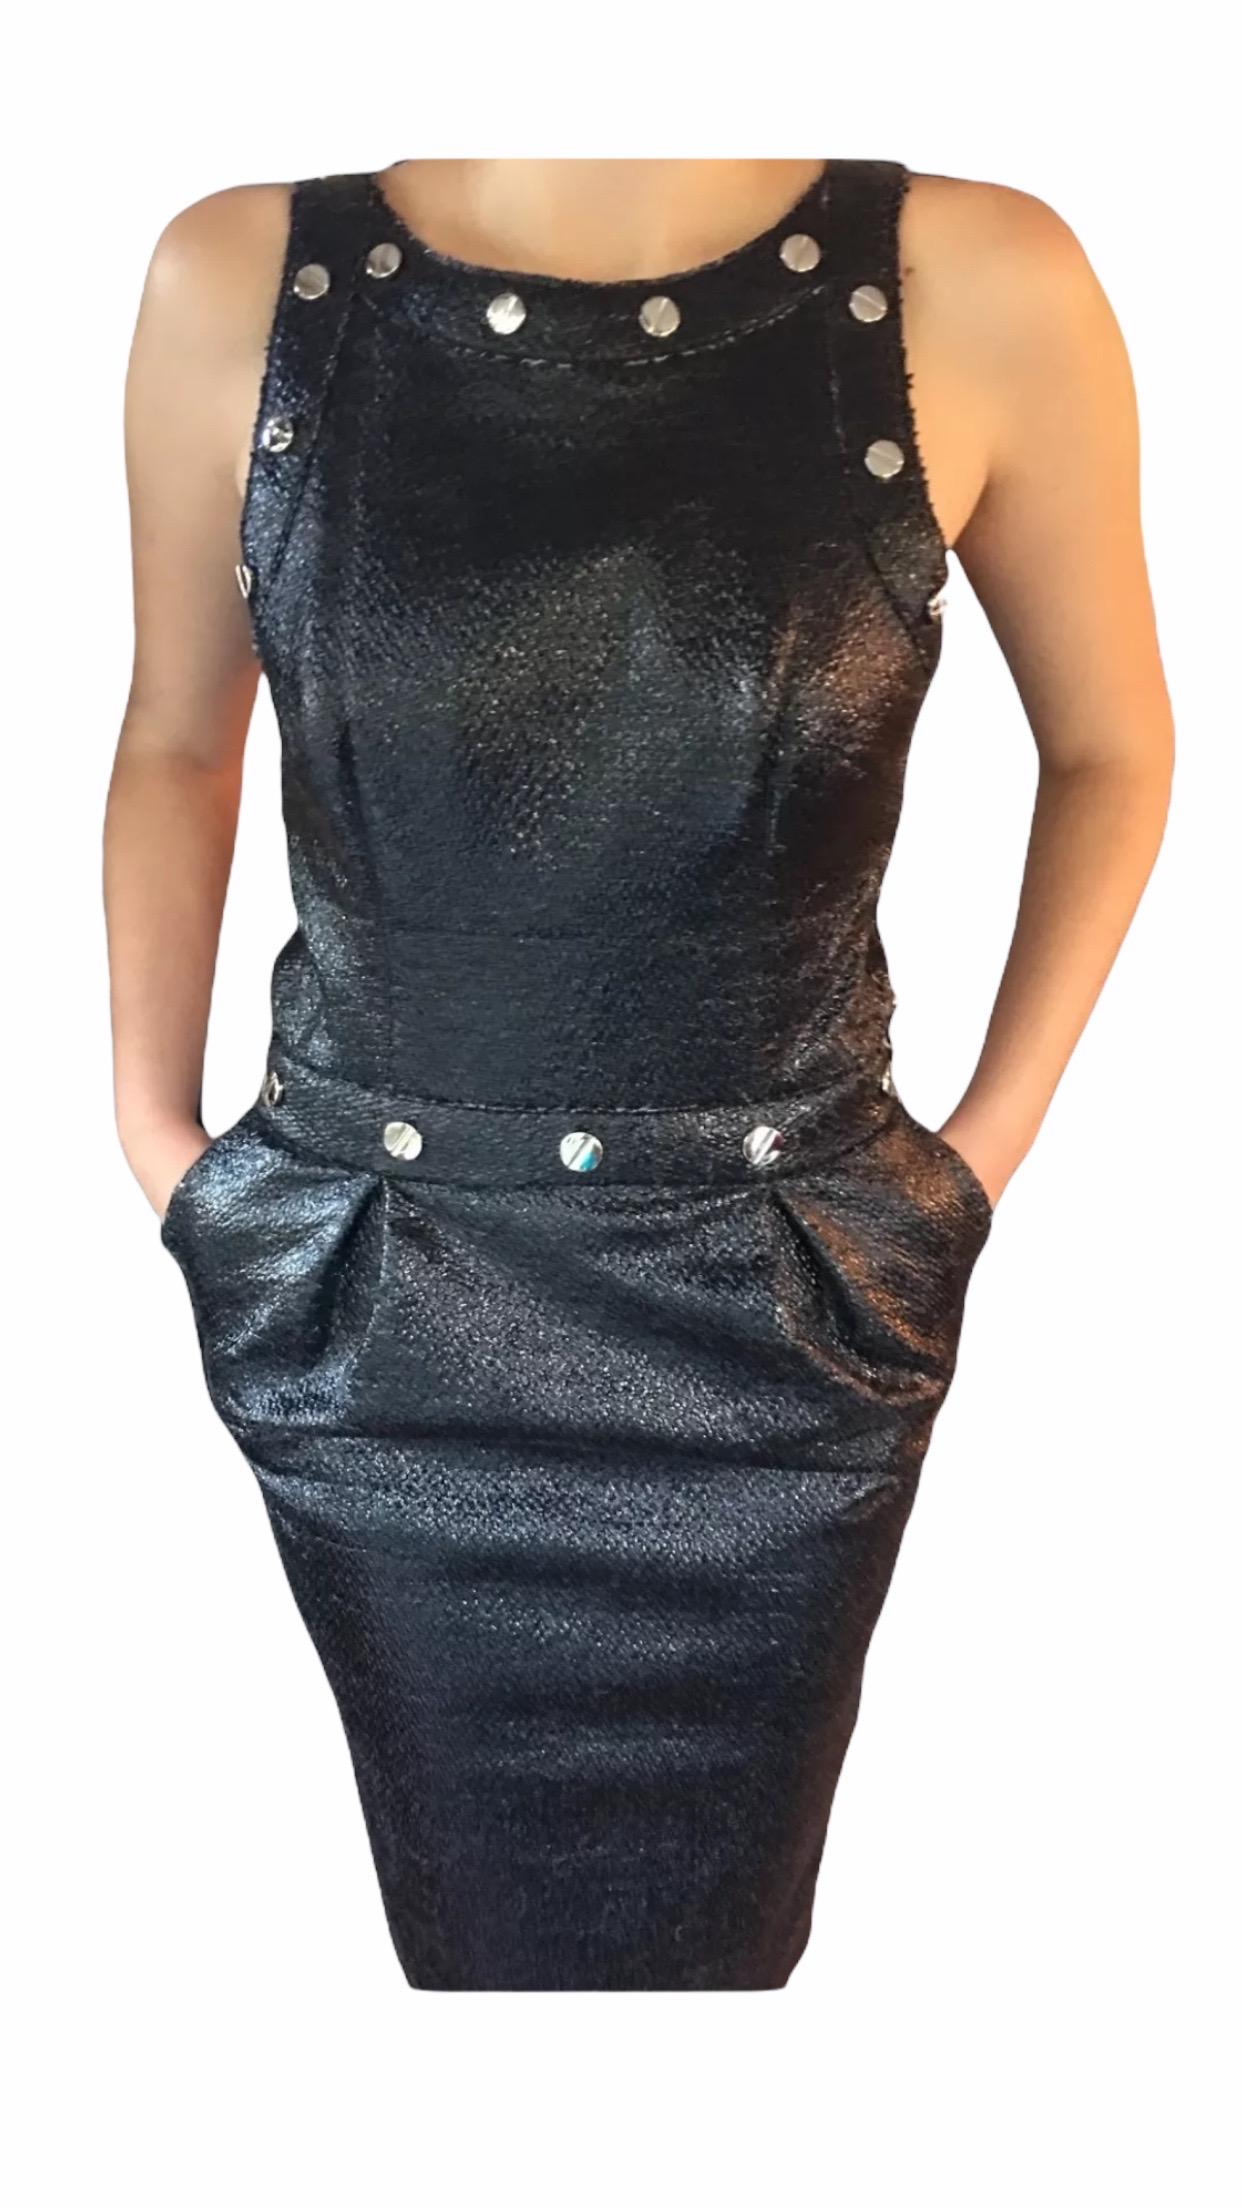 Dolce & Gabbana F/W 2007 Unworn Open Back Leather Stud Embellished Bodycon Dress In Good Condition For Sale In Naples, FL